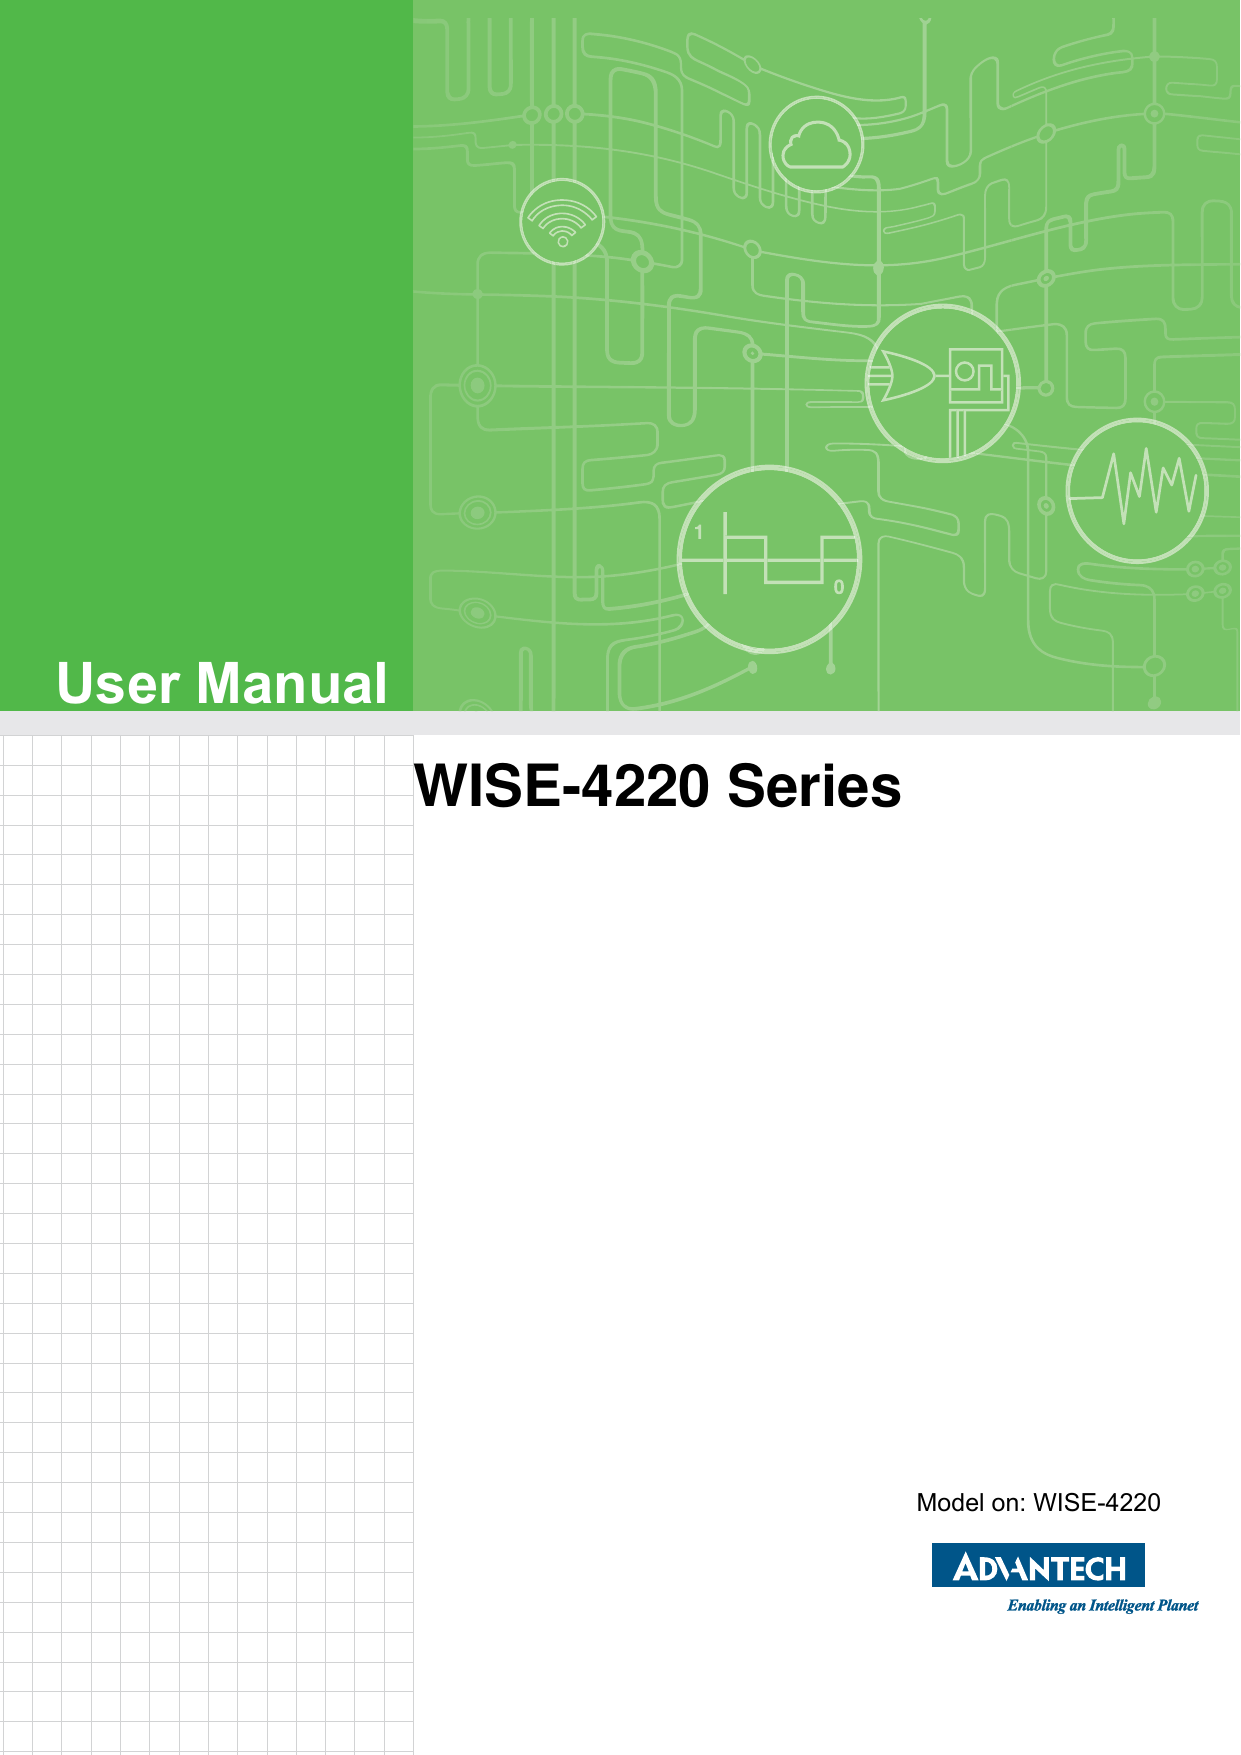 User ManualWISE-4220 SeriesModel on: WISE4220